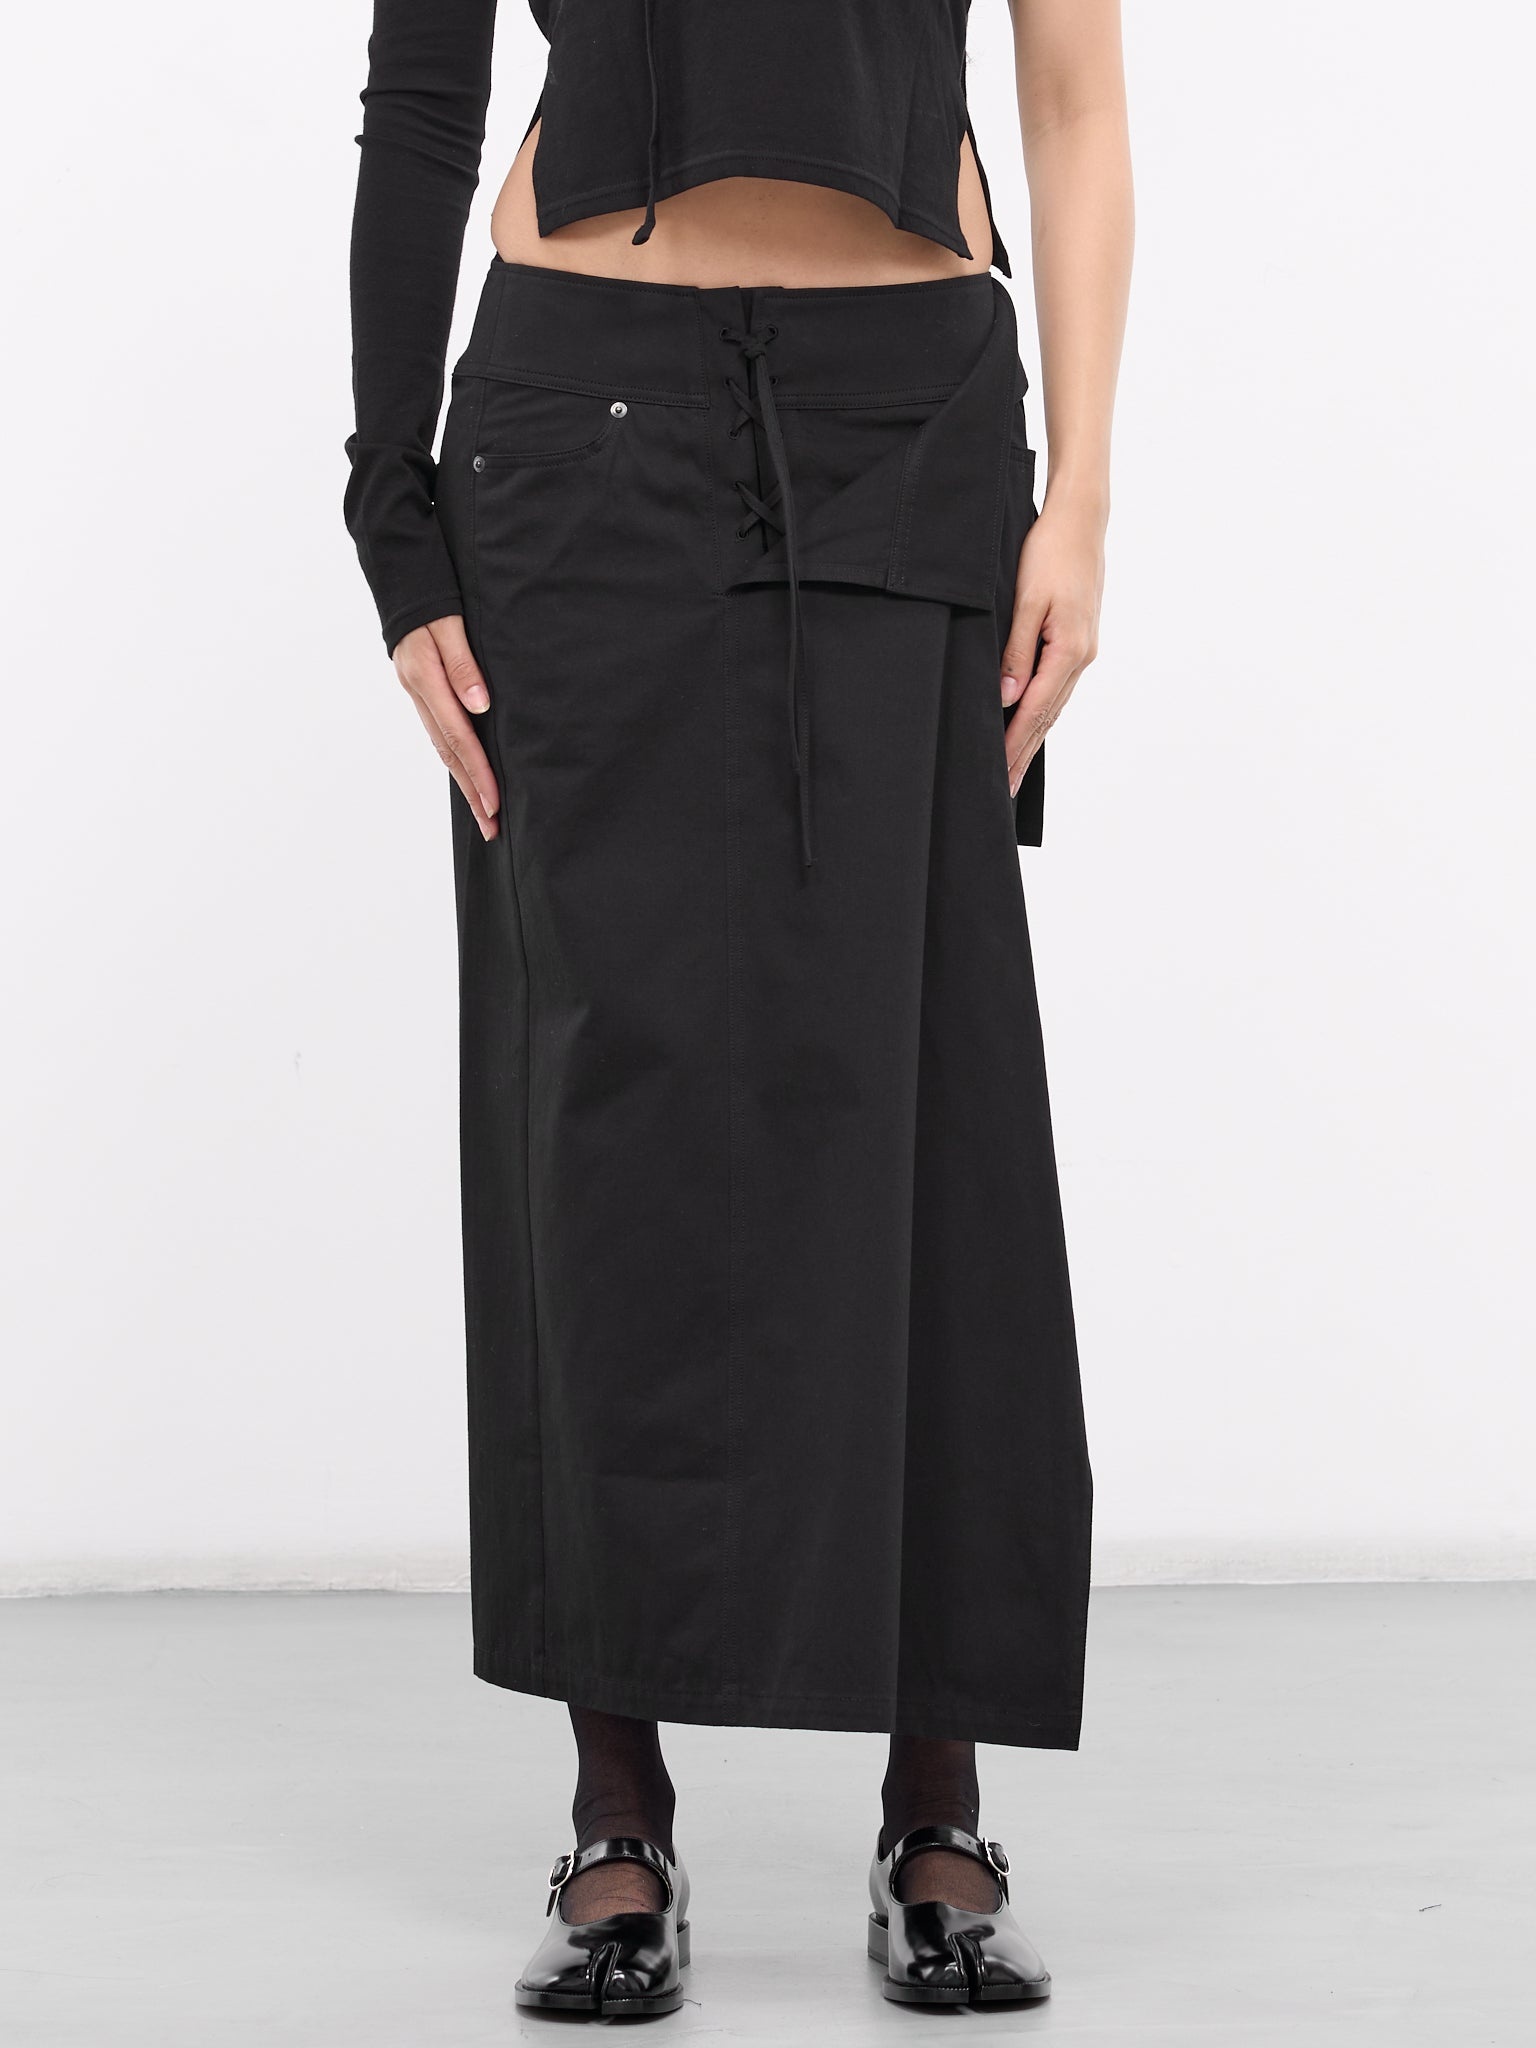 Lace-Up Maxi Skirt - 1